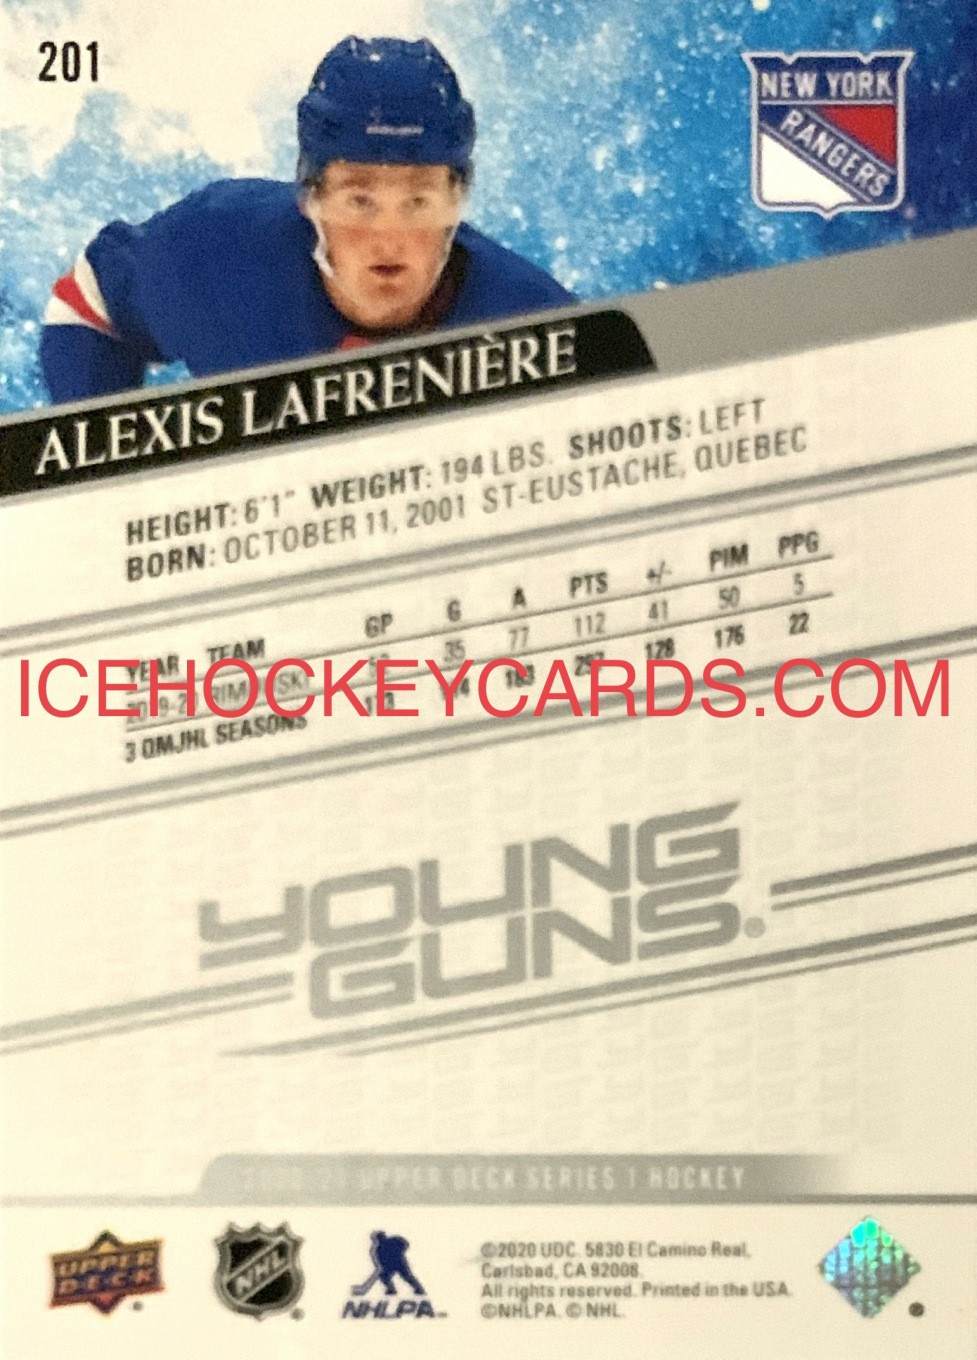 Upper Deck - Series 2020-21 - Alexis Lafreniere Young Guns Rookie Card - 2020 Draft pick #1 back